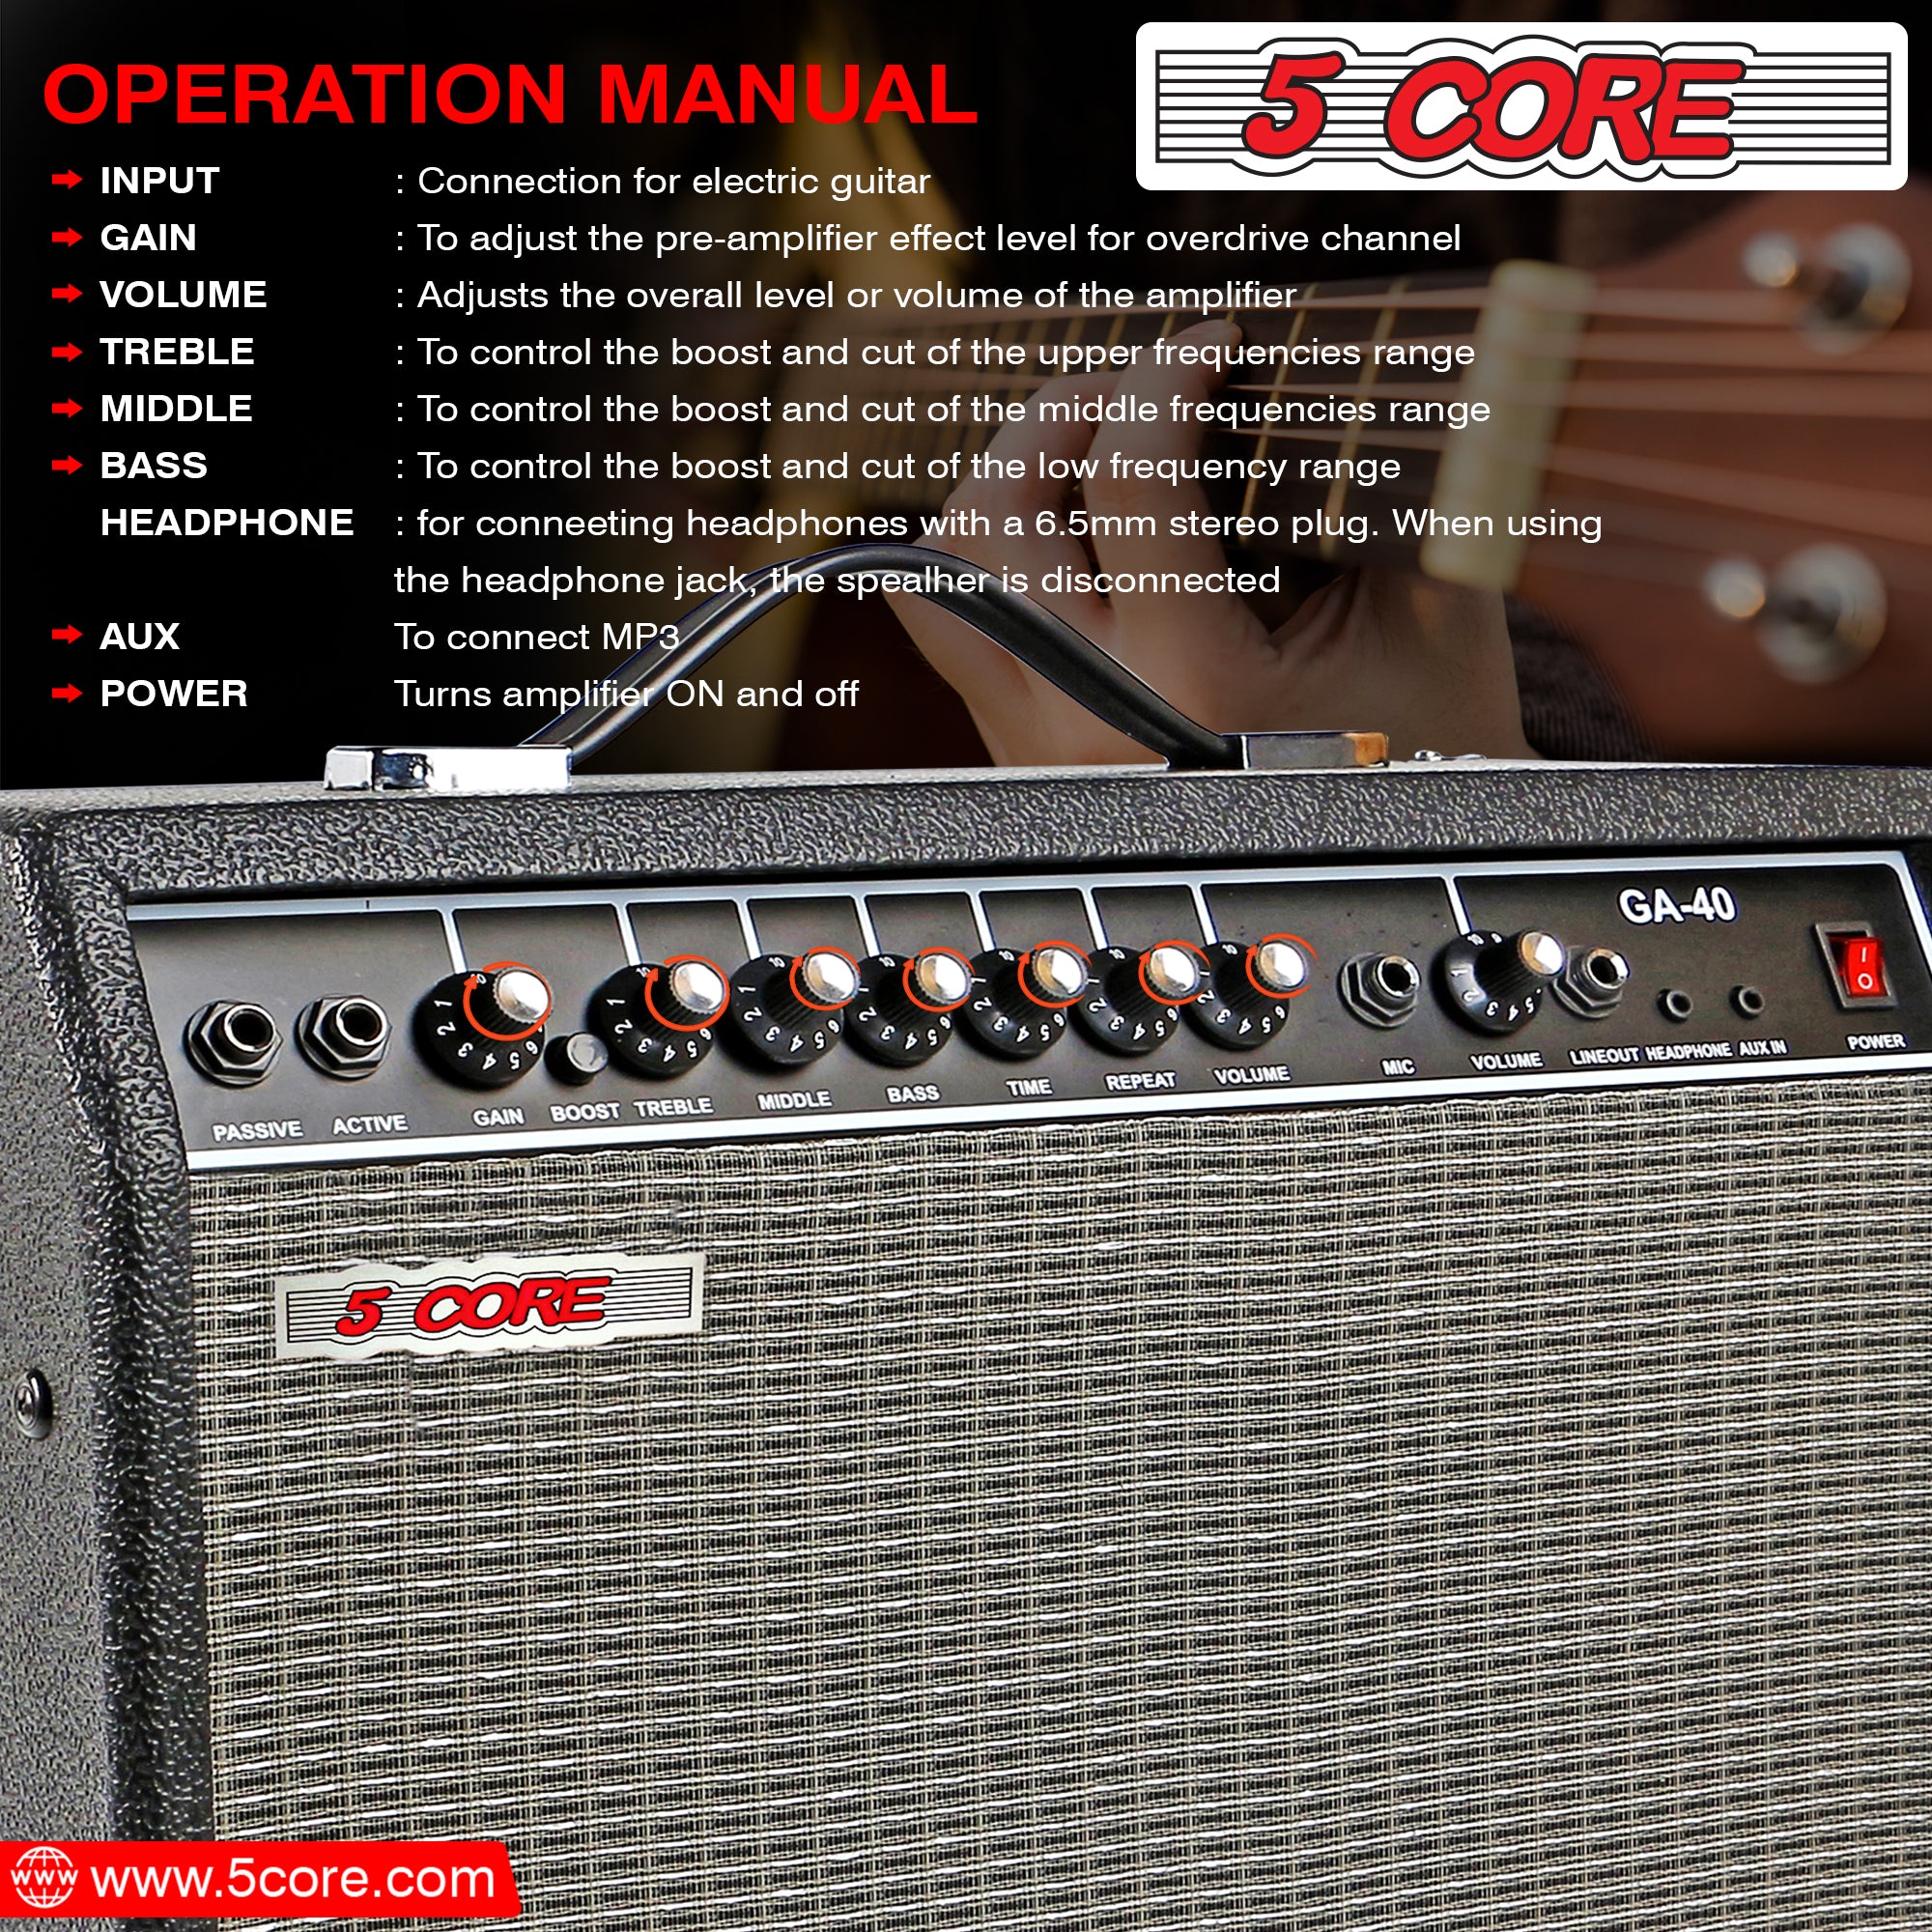 Optimized frequency for compatibility, delivering clear and authentic tones.